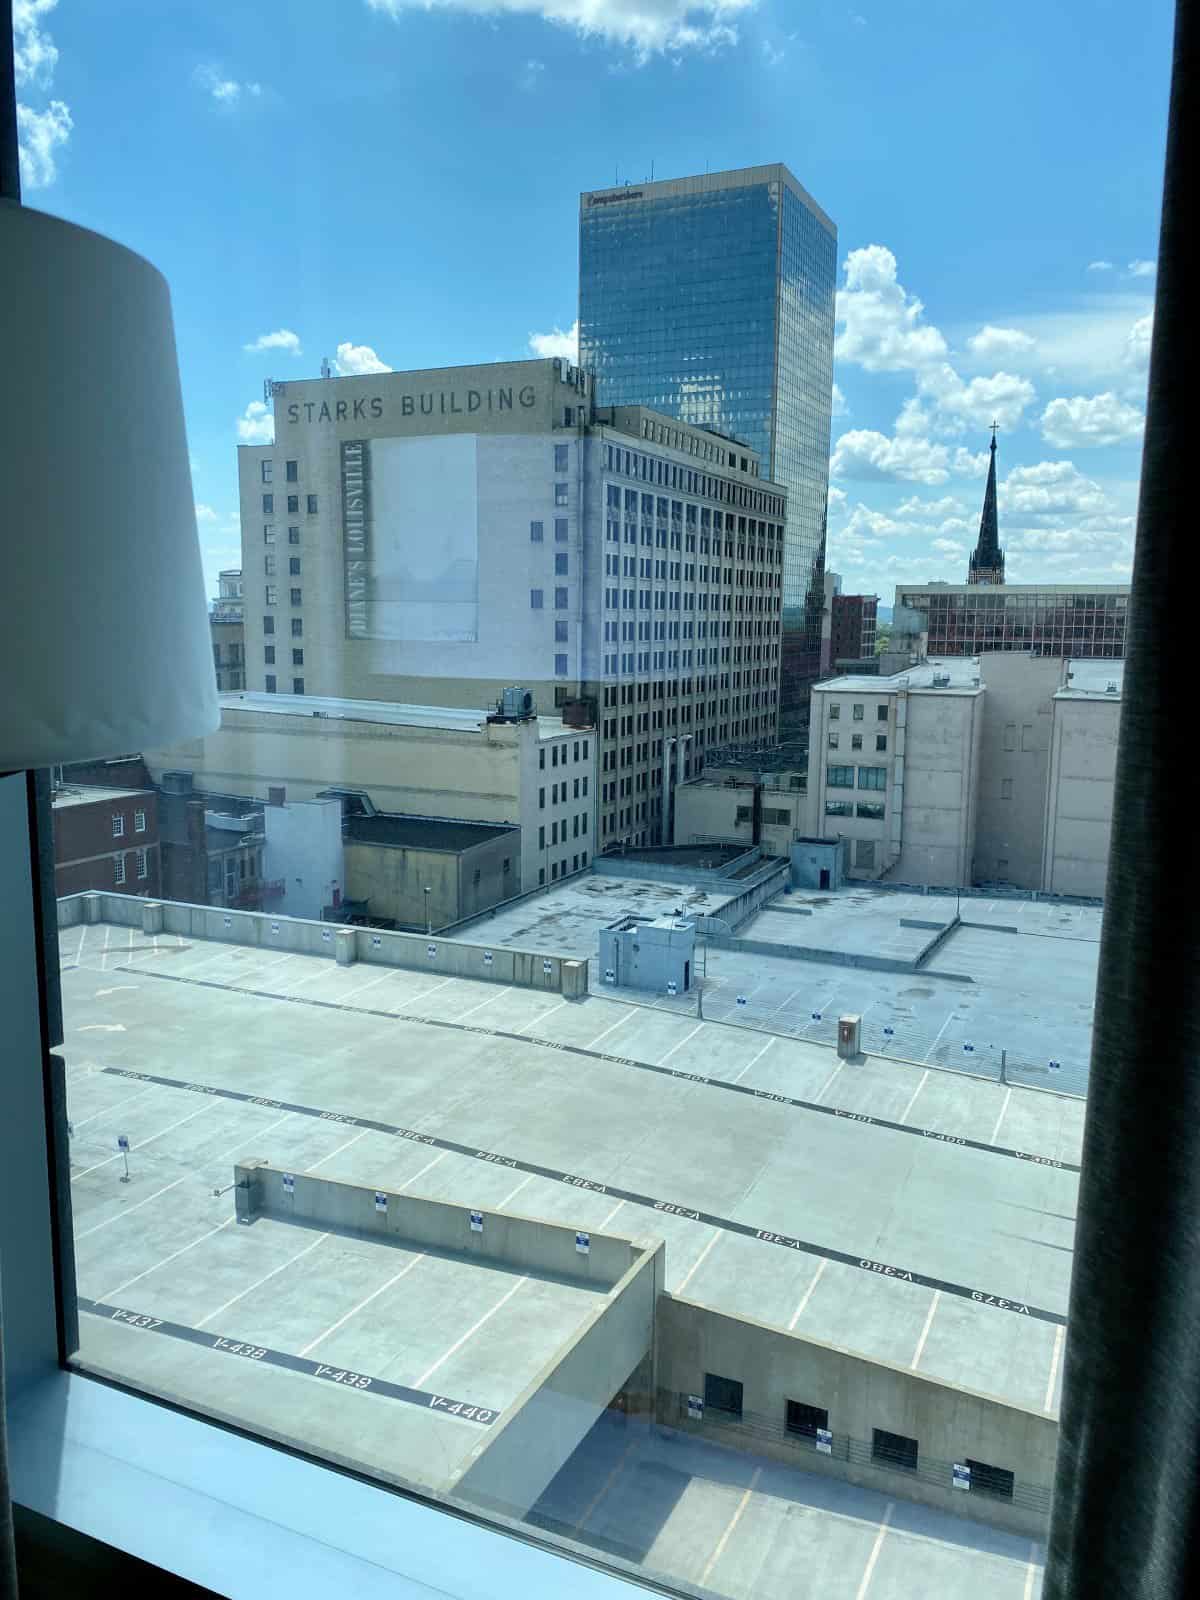 Omni Louisville review - the "view" from my room left a lot to be desired